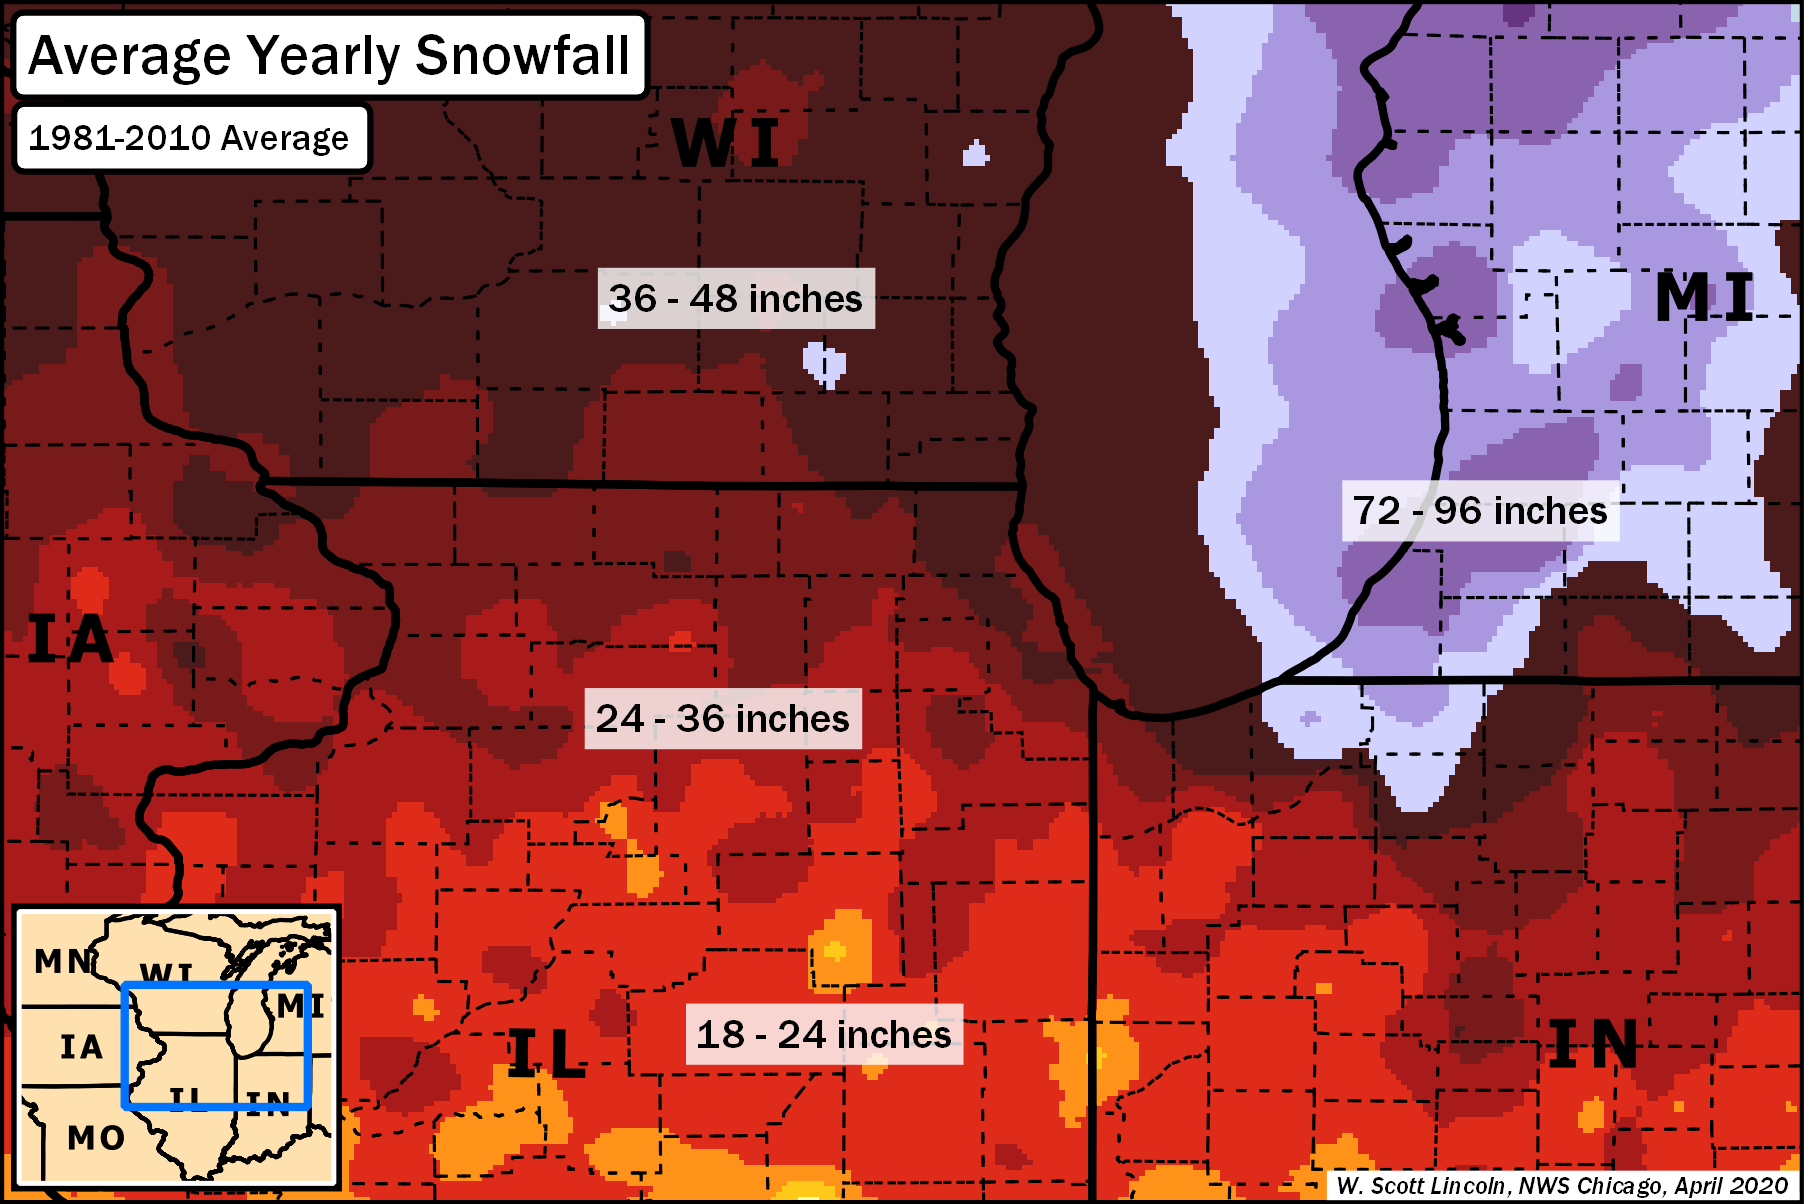 Graphic showing yearly average snowfall for the vicinity of northeast Illinois and northwest Indiana